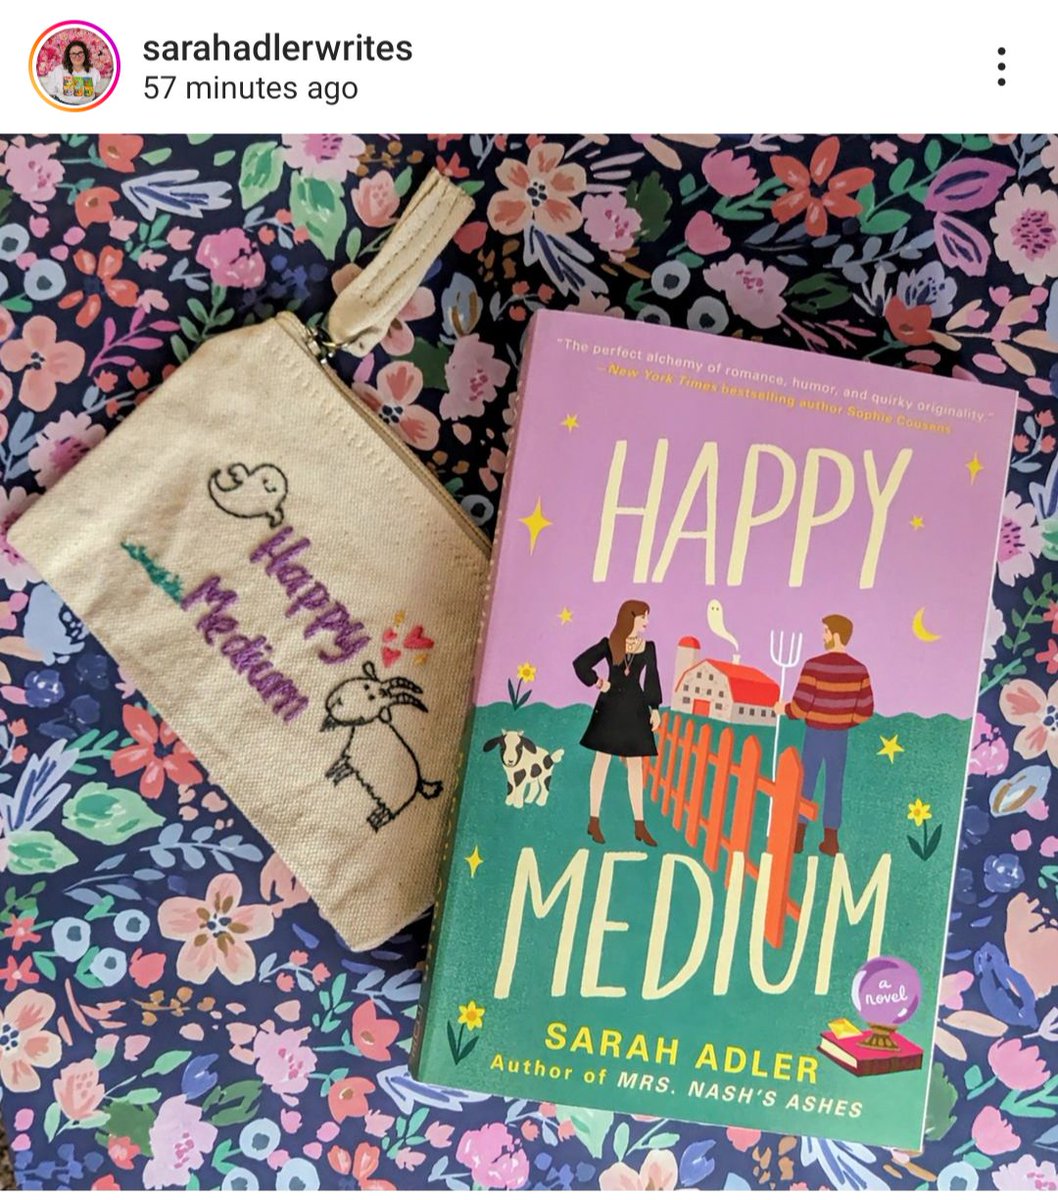 I'm doing a giveaway with @sarahaadler 😍😍😍 You can get her new book and the embroidery I made to go with it. Go to her IG page to enter.